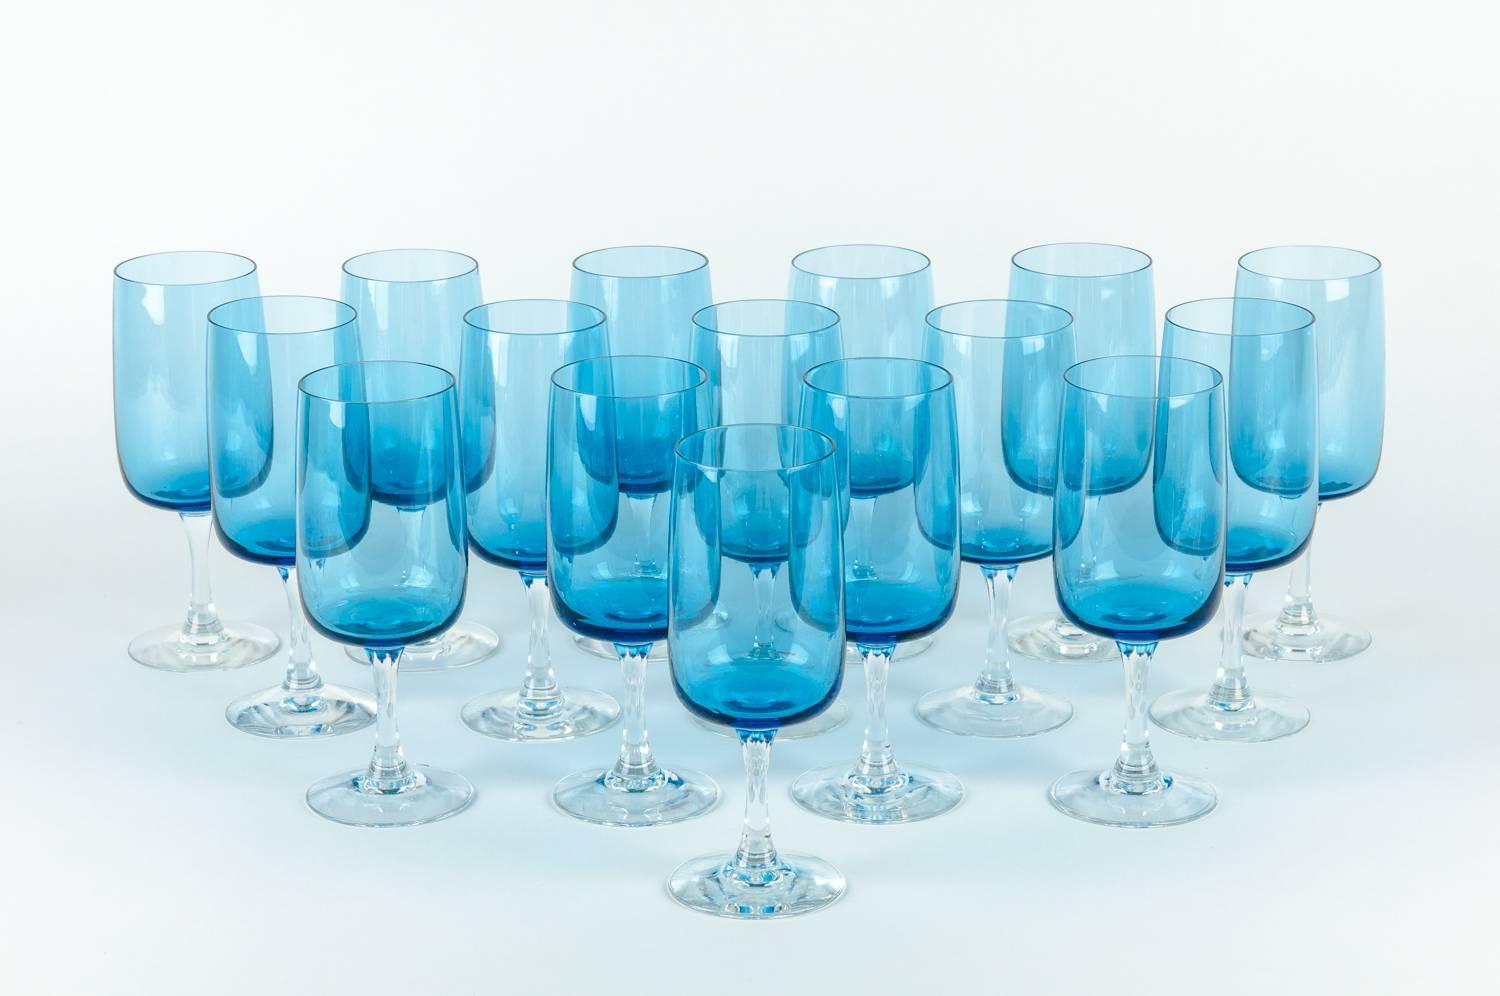 Vintage North America crystal barware wine / water glassware set of 16 pieces. Each glass is in excellent condition. Each glass measure about 7 inches high x 2.8 inches diameter.